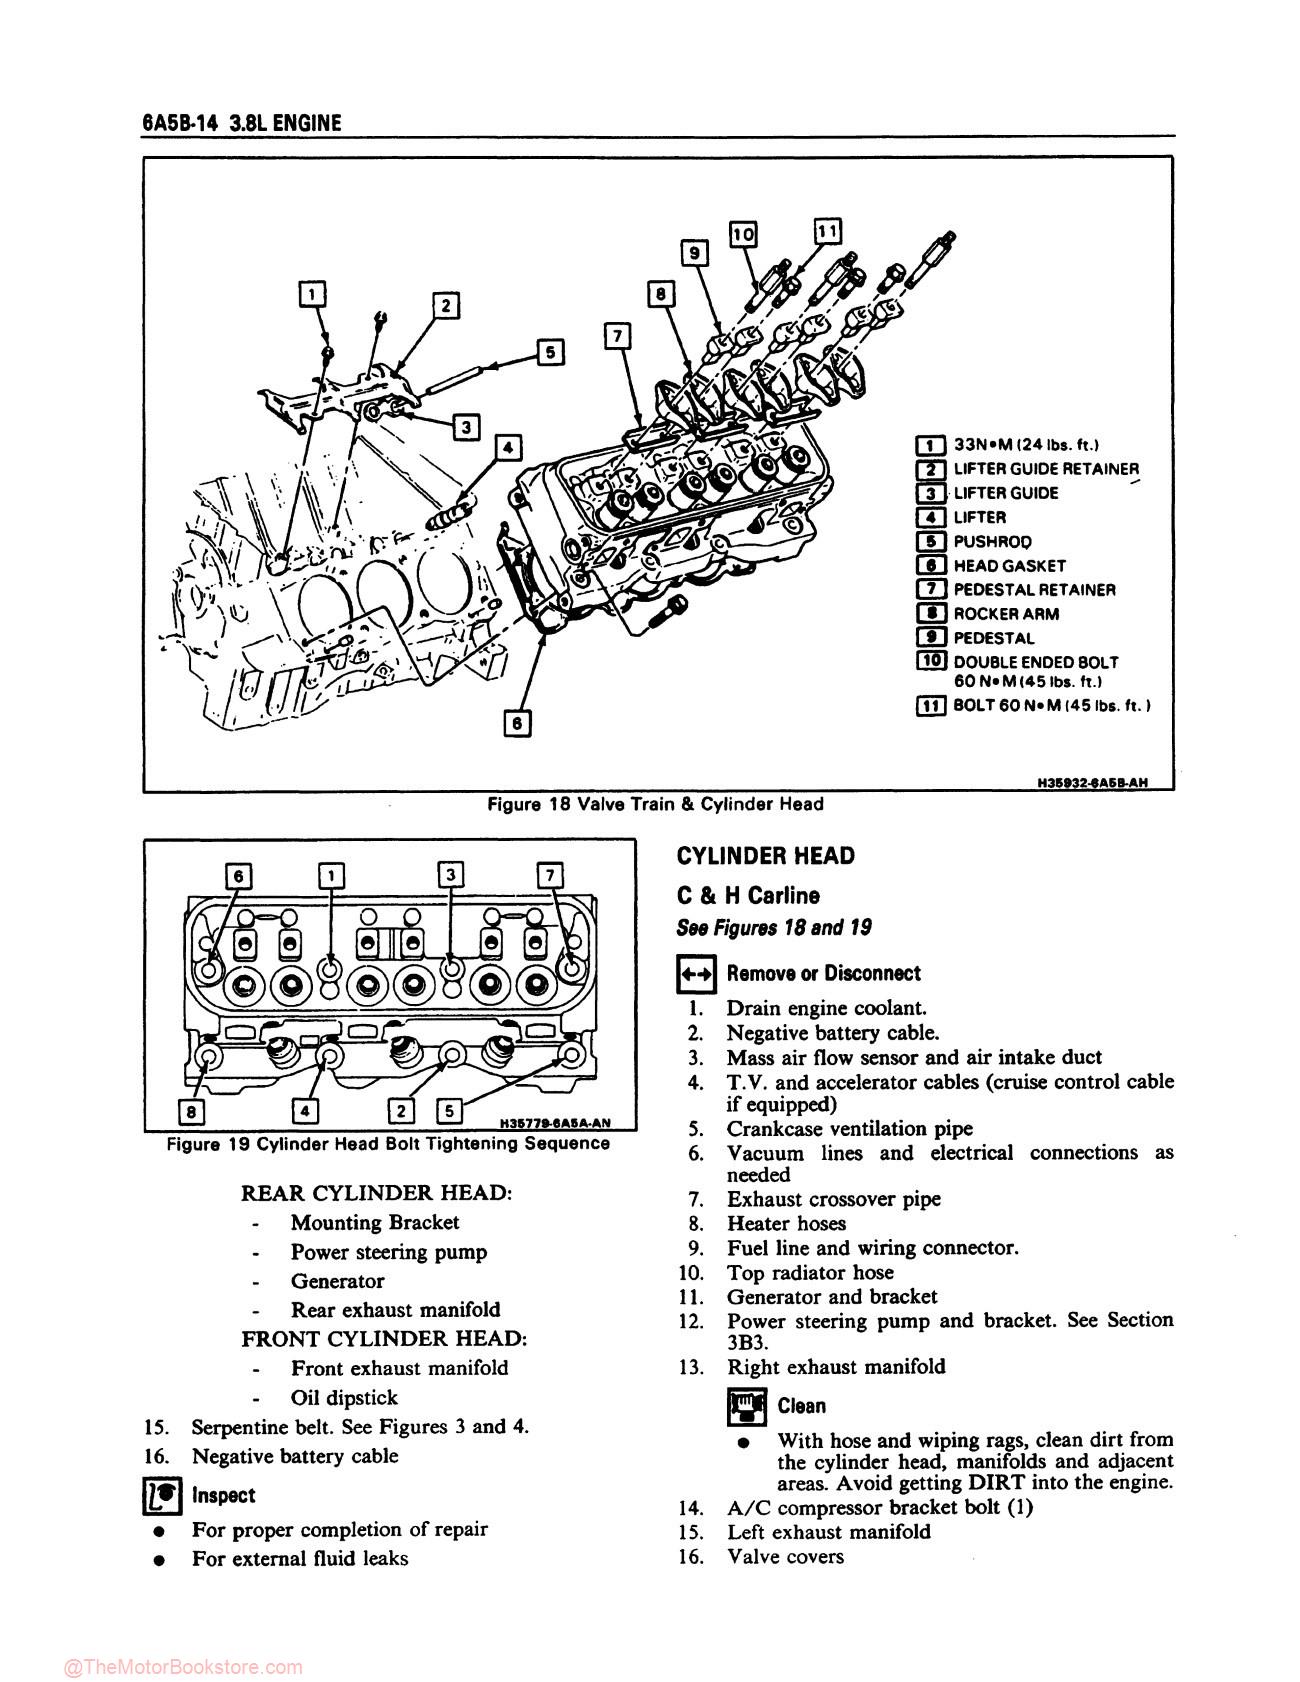 1987 Buick and Grand National Service Manual - Sample Page 1